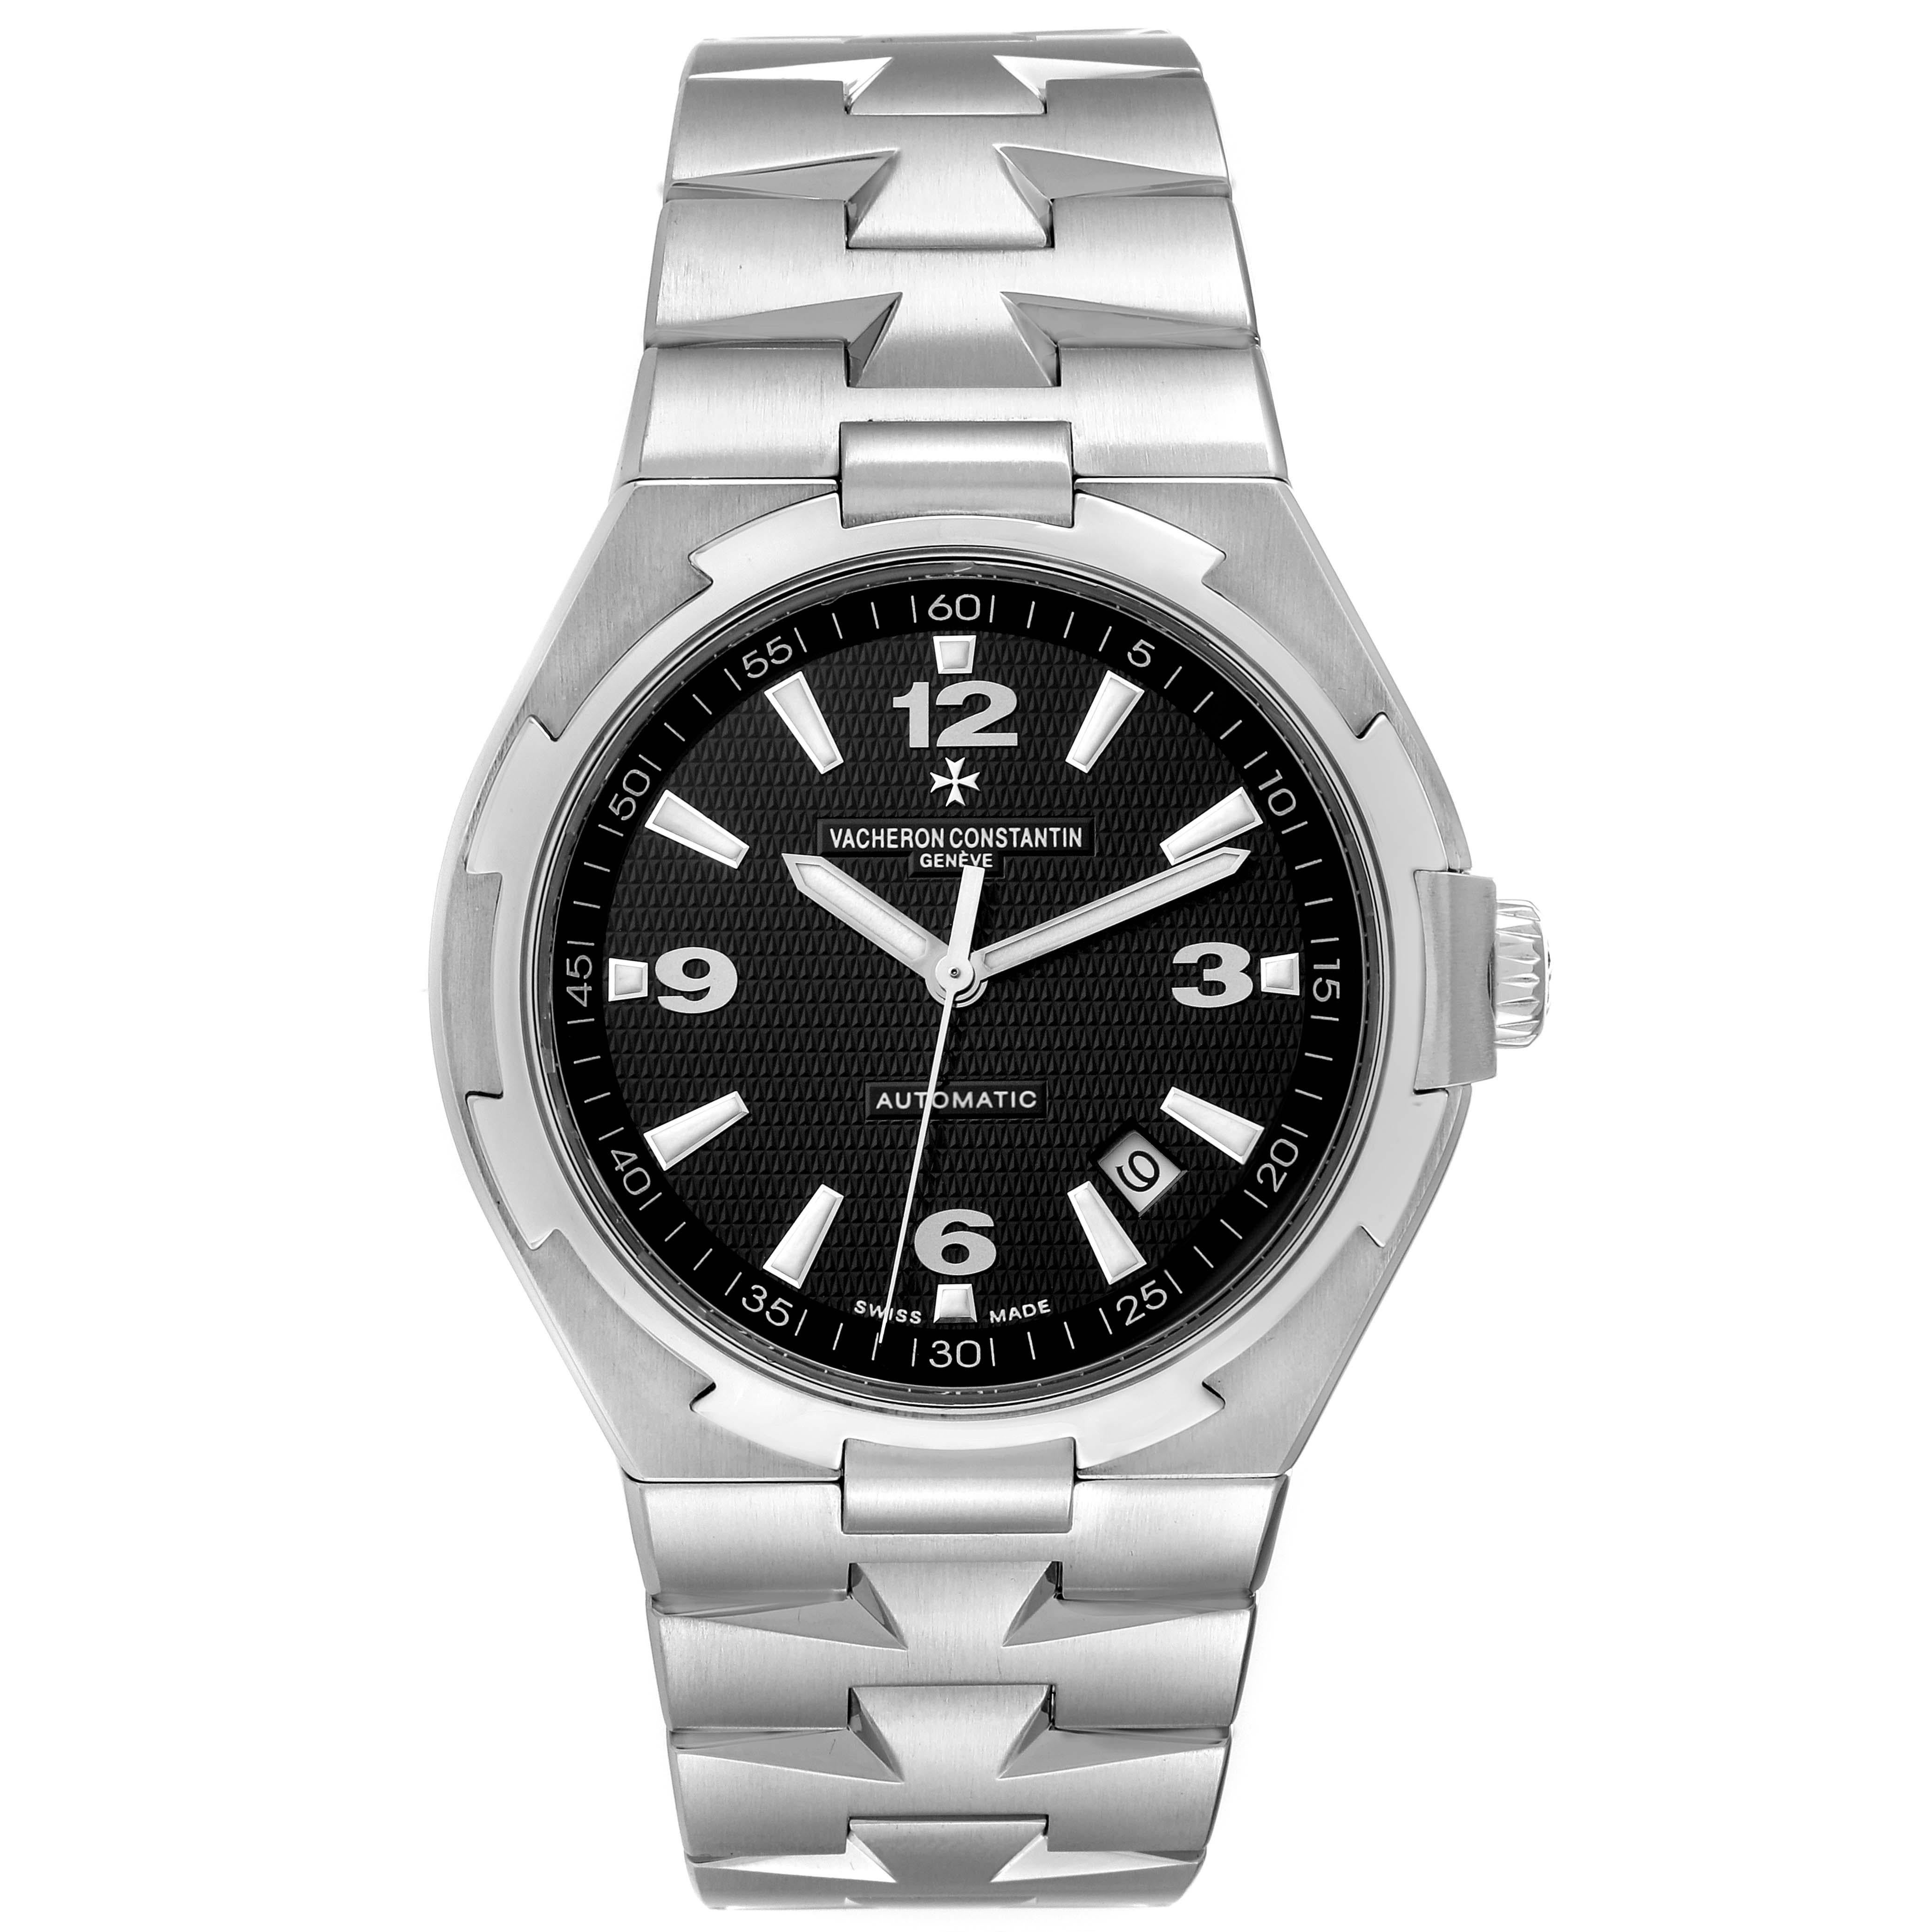 Vacheron Constantin Overseas Black Dial Steel Mens Watch 47040 Box Papers. Automatic self-winding movement. Brushed stainless steel case 42.5 mm in diameter. Screwed down crown with Vacheron Constantin logo. Solid case back with 'overseas'